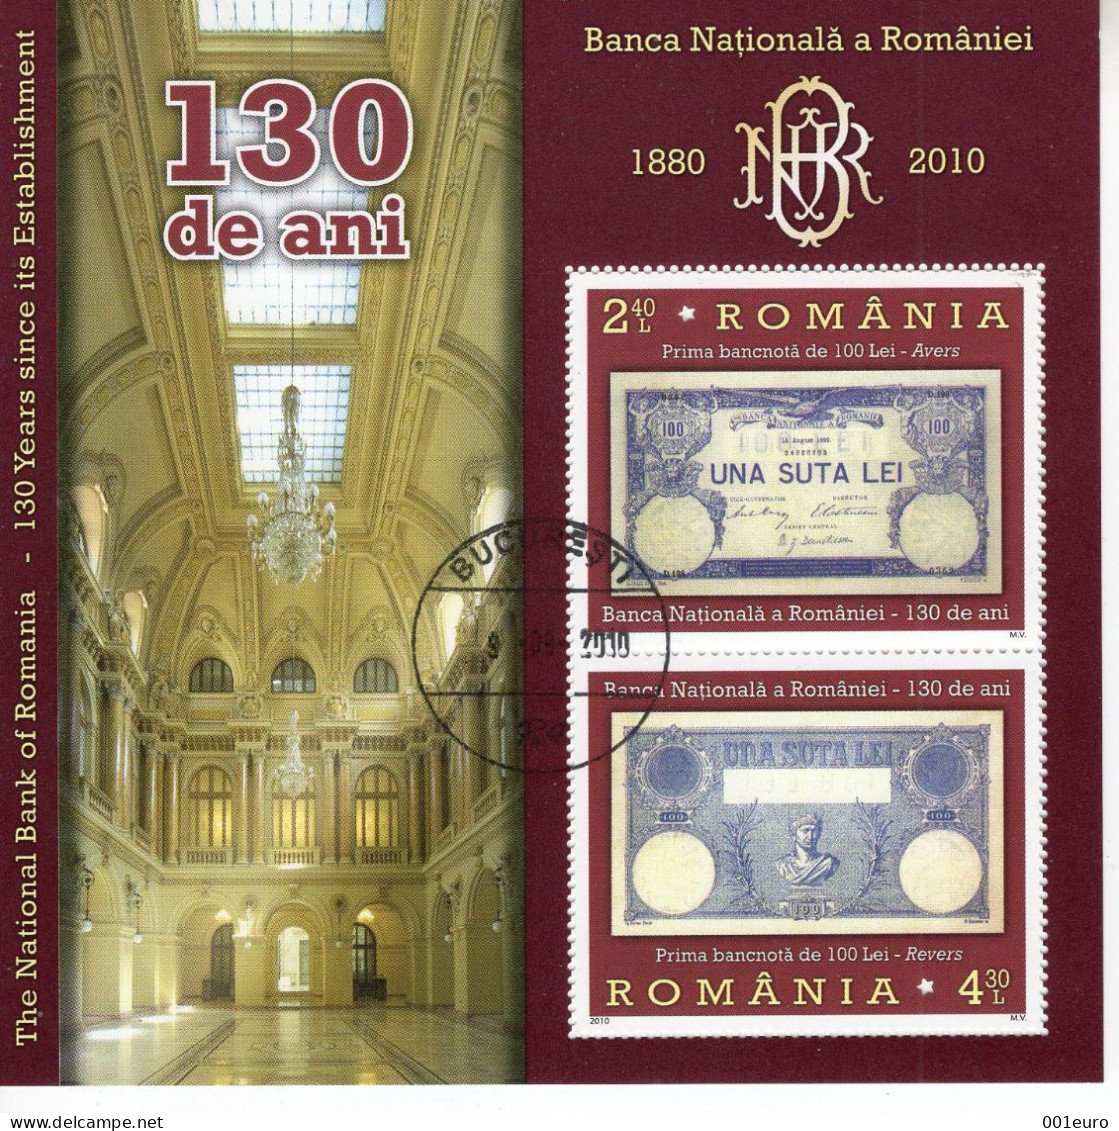 ROMANIA 2010 : ROMANIAN NATIONAL BANK130 YEARS - BANKNOTE, Used Souvenir Block - Registered Shipping! - Oblitérés